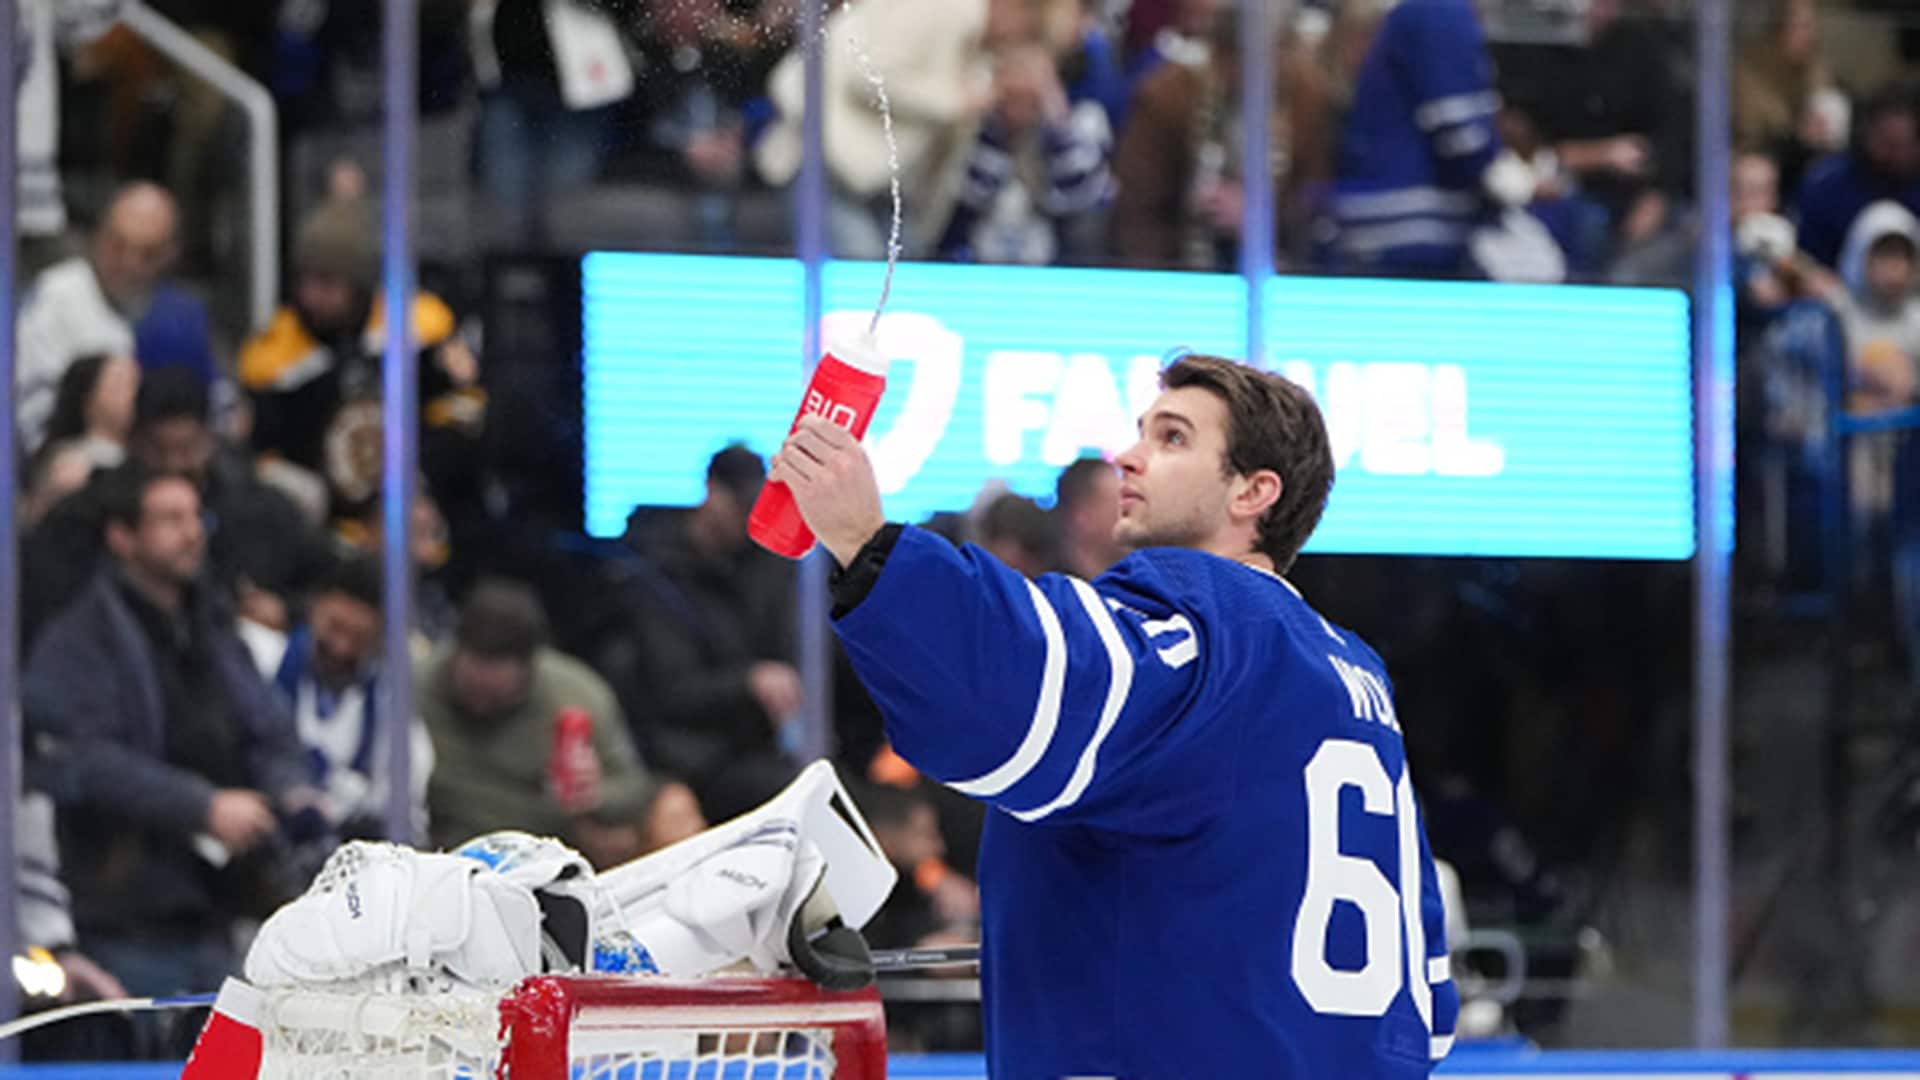 Maple Leafs recall goaltender Woll after successful conditioning stint with  Marlies